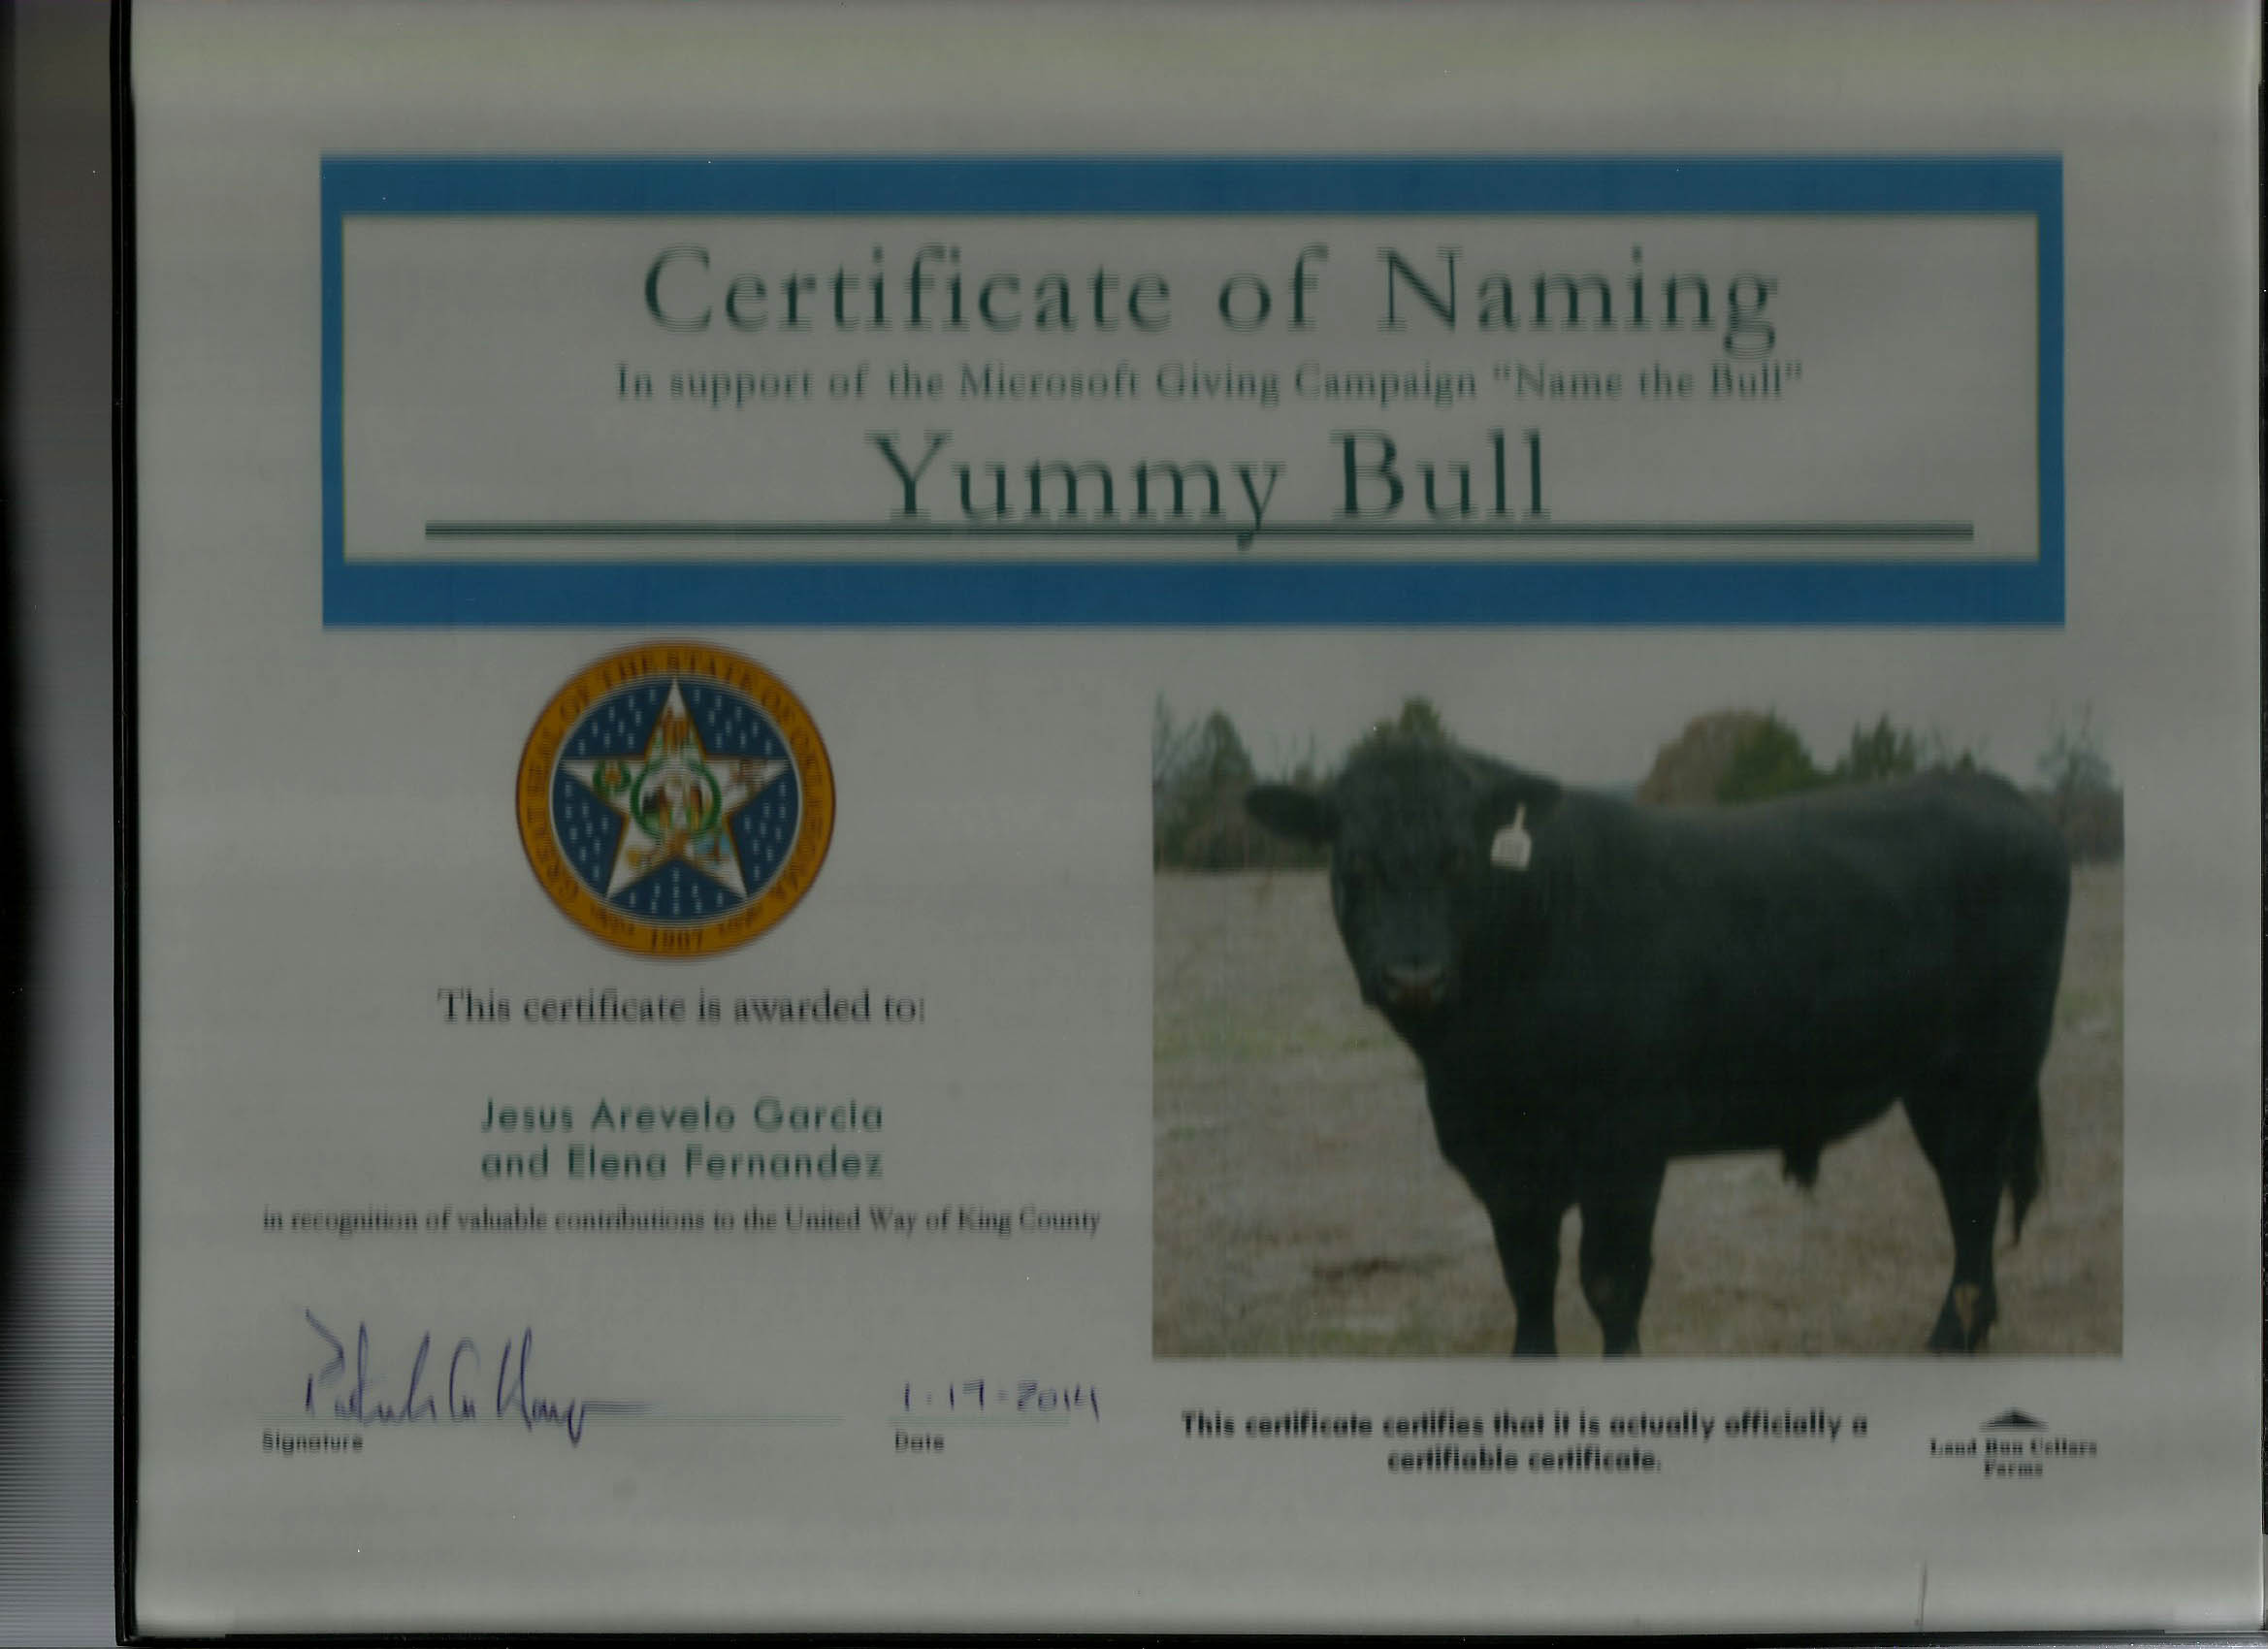 The Yummy Bull does exist and he lives in Oklahoma